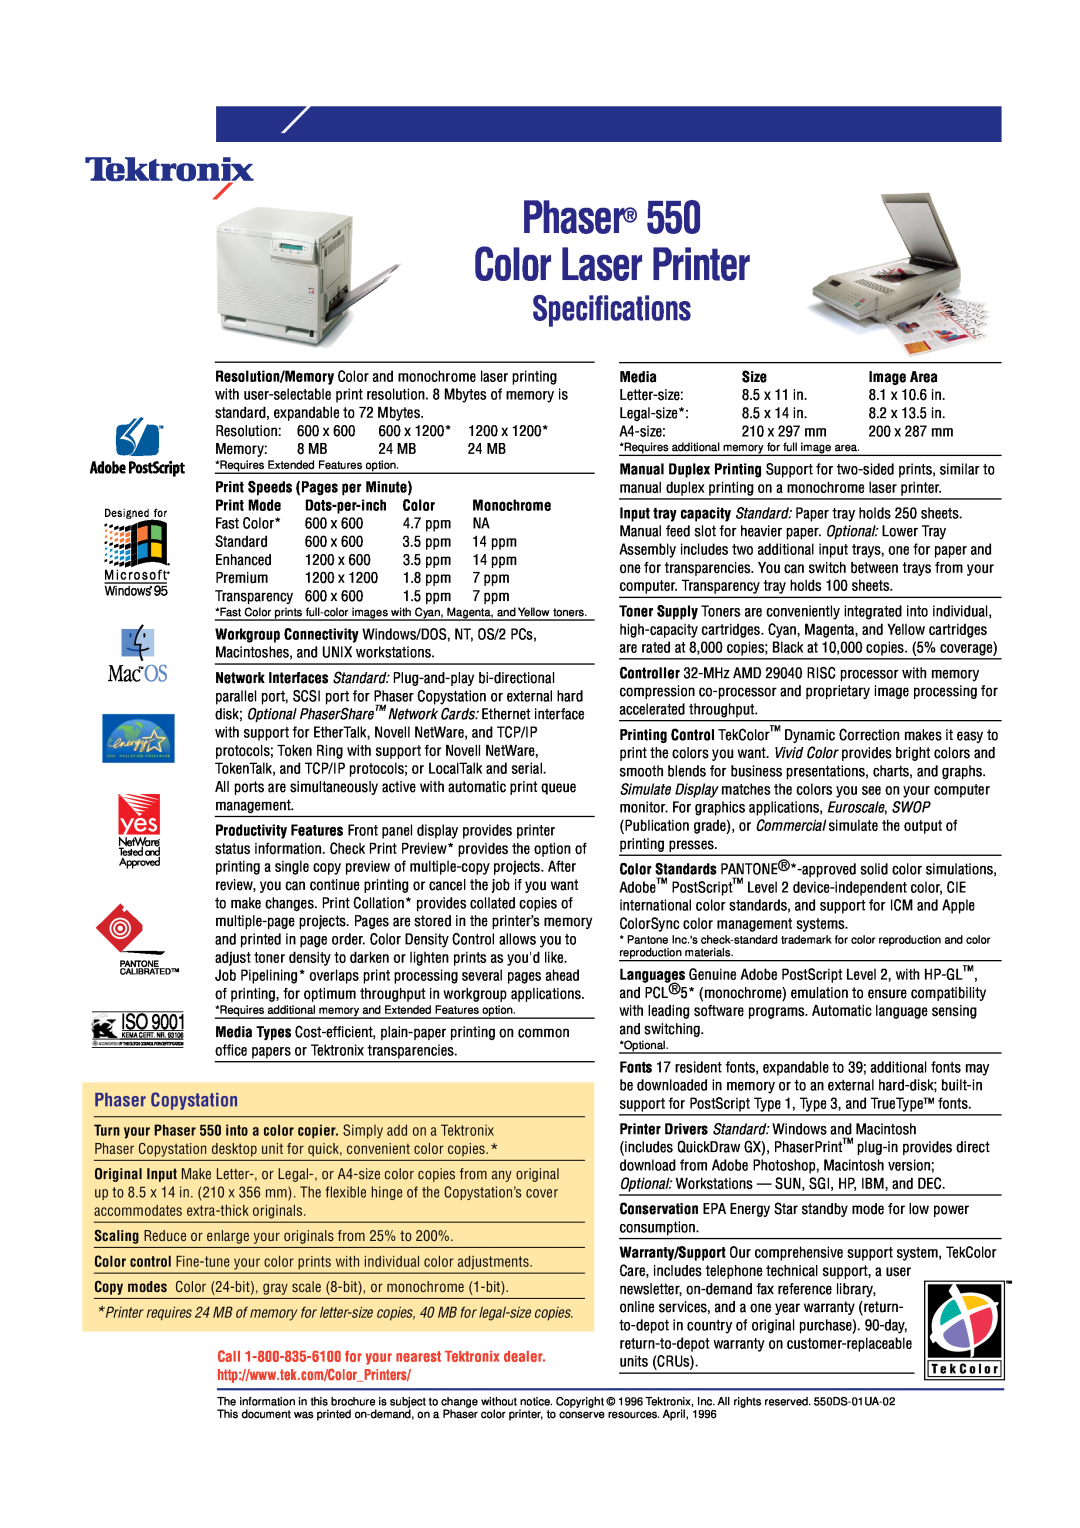 Tektronix 550 Specifications, Phaser Copystation, Phaser Color Laser Printer, Print Speeds Pages per Minute, Print Mode 